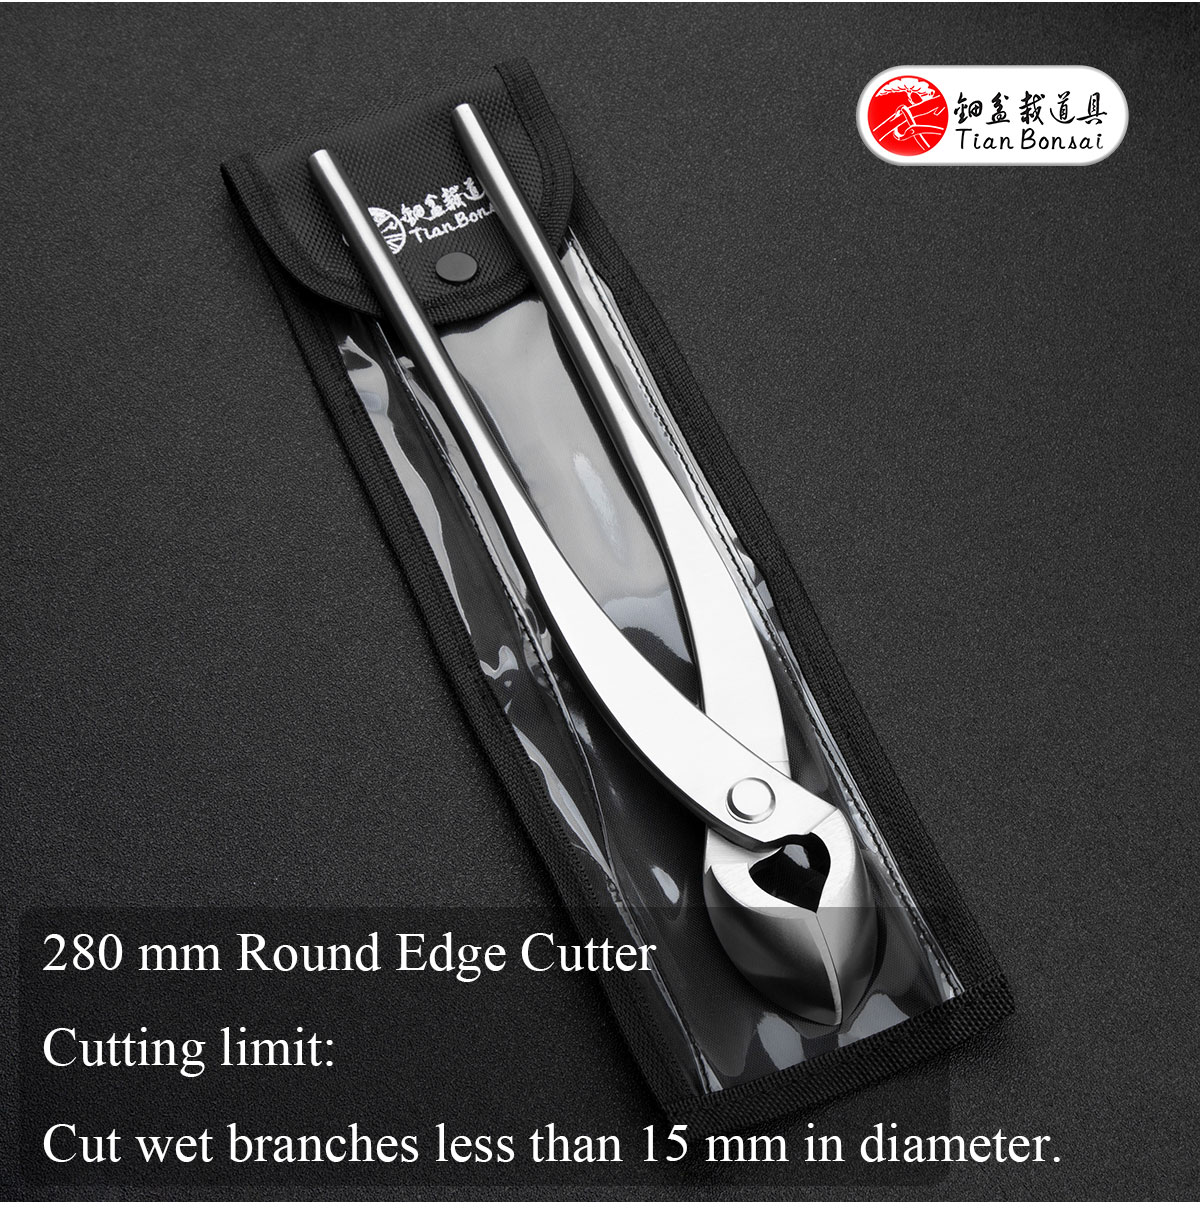 Full Stainless Steel 280 mm branch cutter straight edge cutter